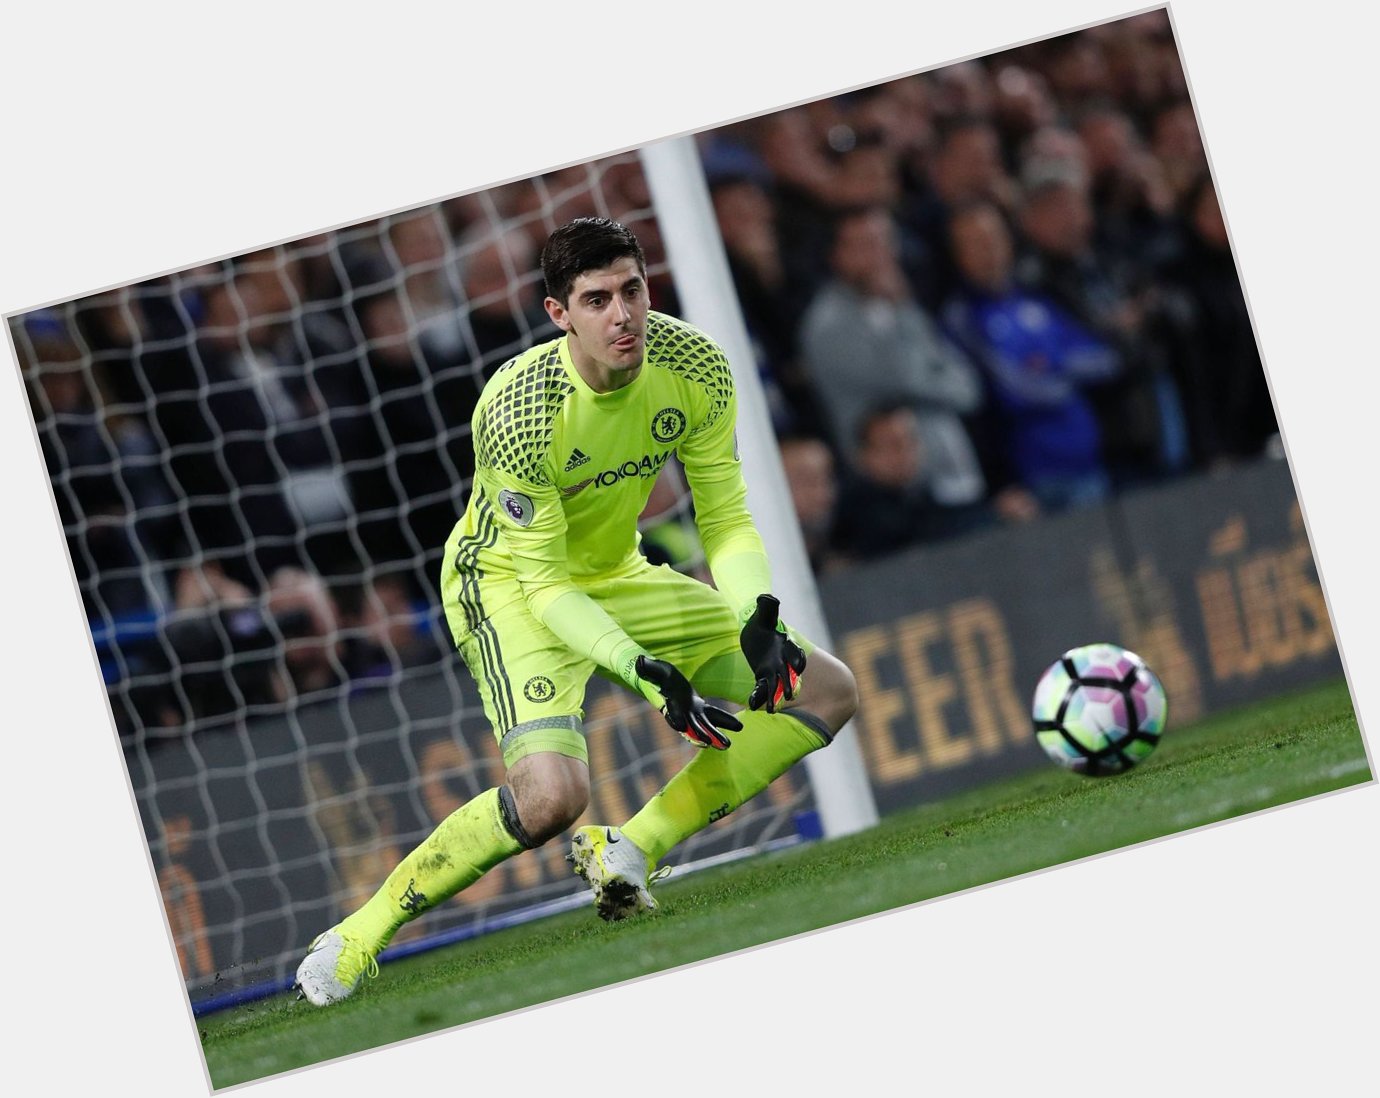 Happy birthday !!!!!
Thibaut Courtois   What a shoot stop  